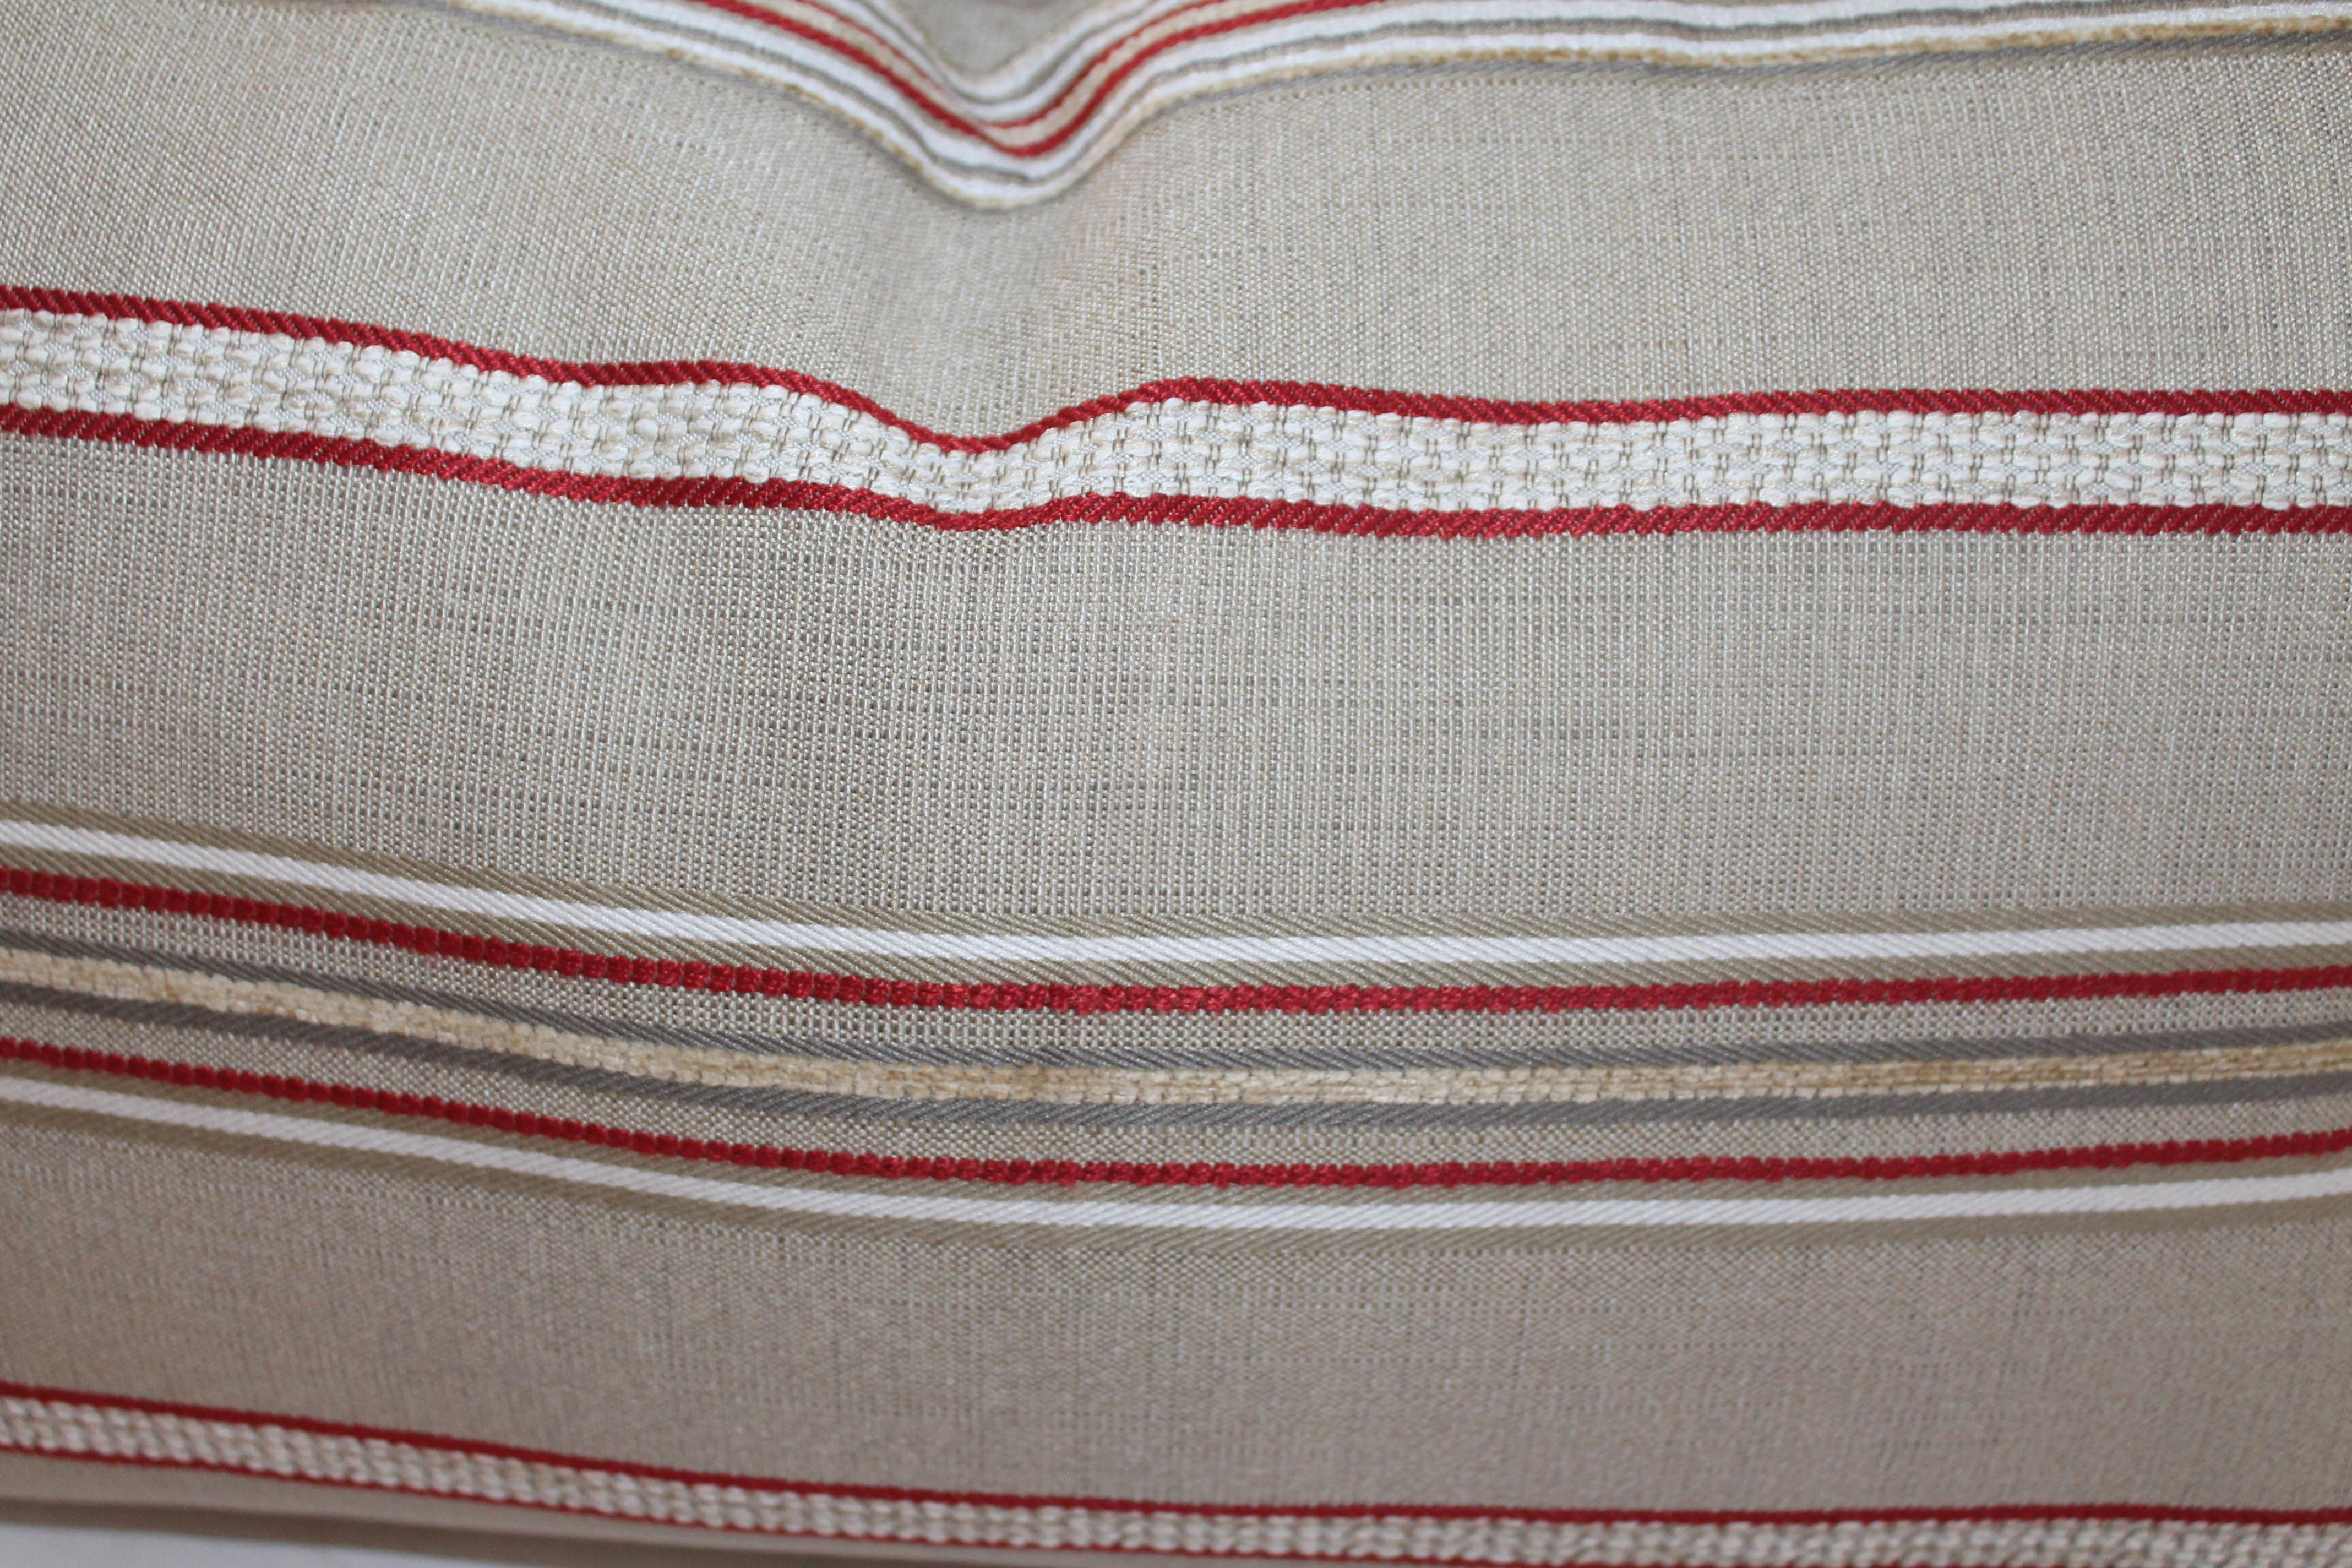 Vintage red and tan ticking bolster pillows. Sold as a pair only. Condition is very good.